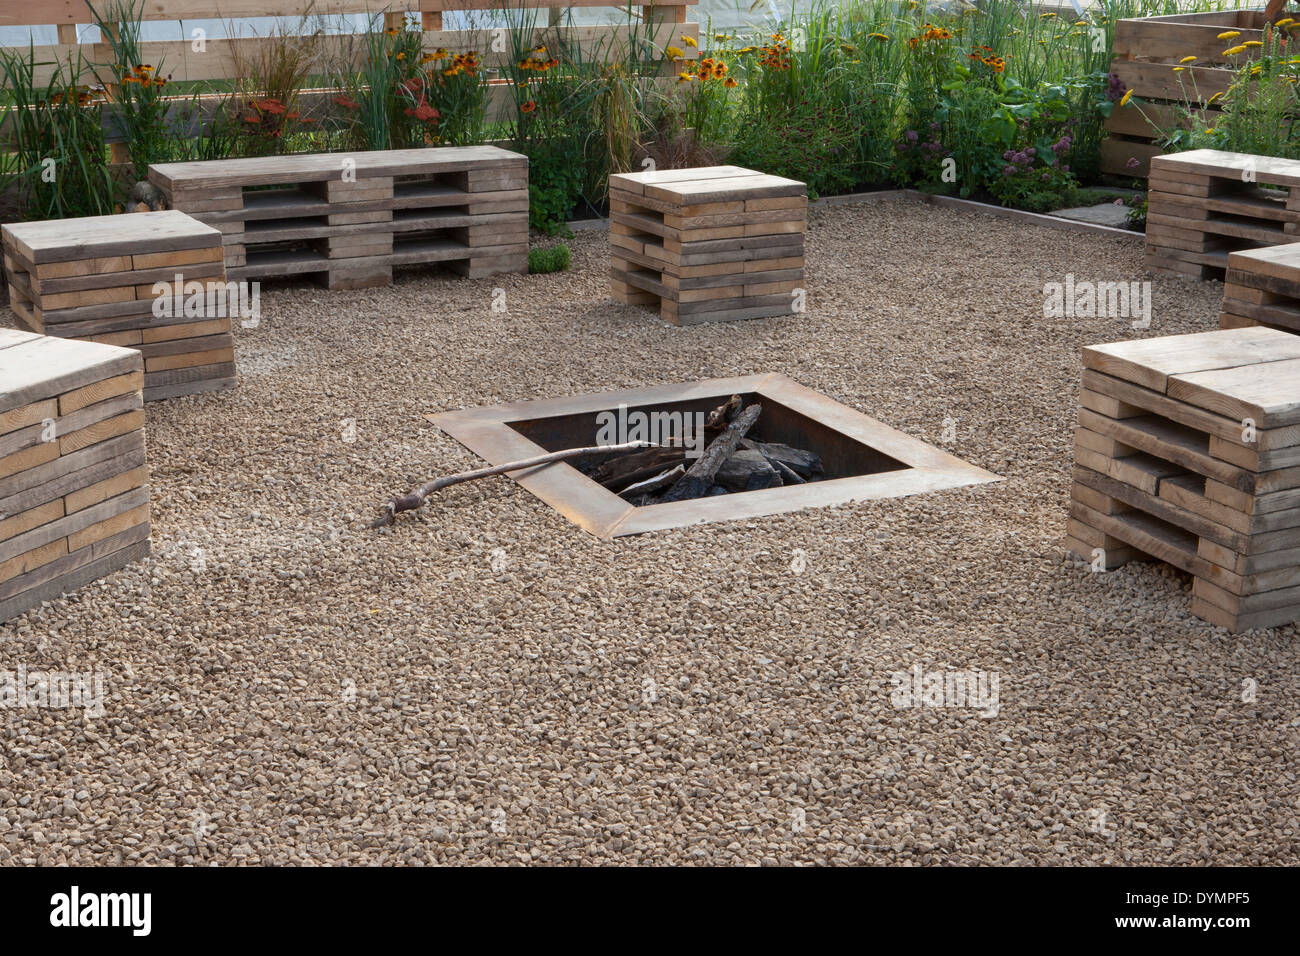 Eco garden with bench seats made of recycled materials - pallets in gravel area with outdoor firepit fire pit England UK Stock Photo